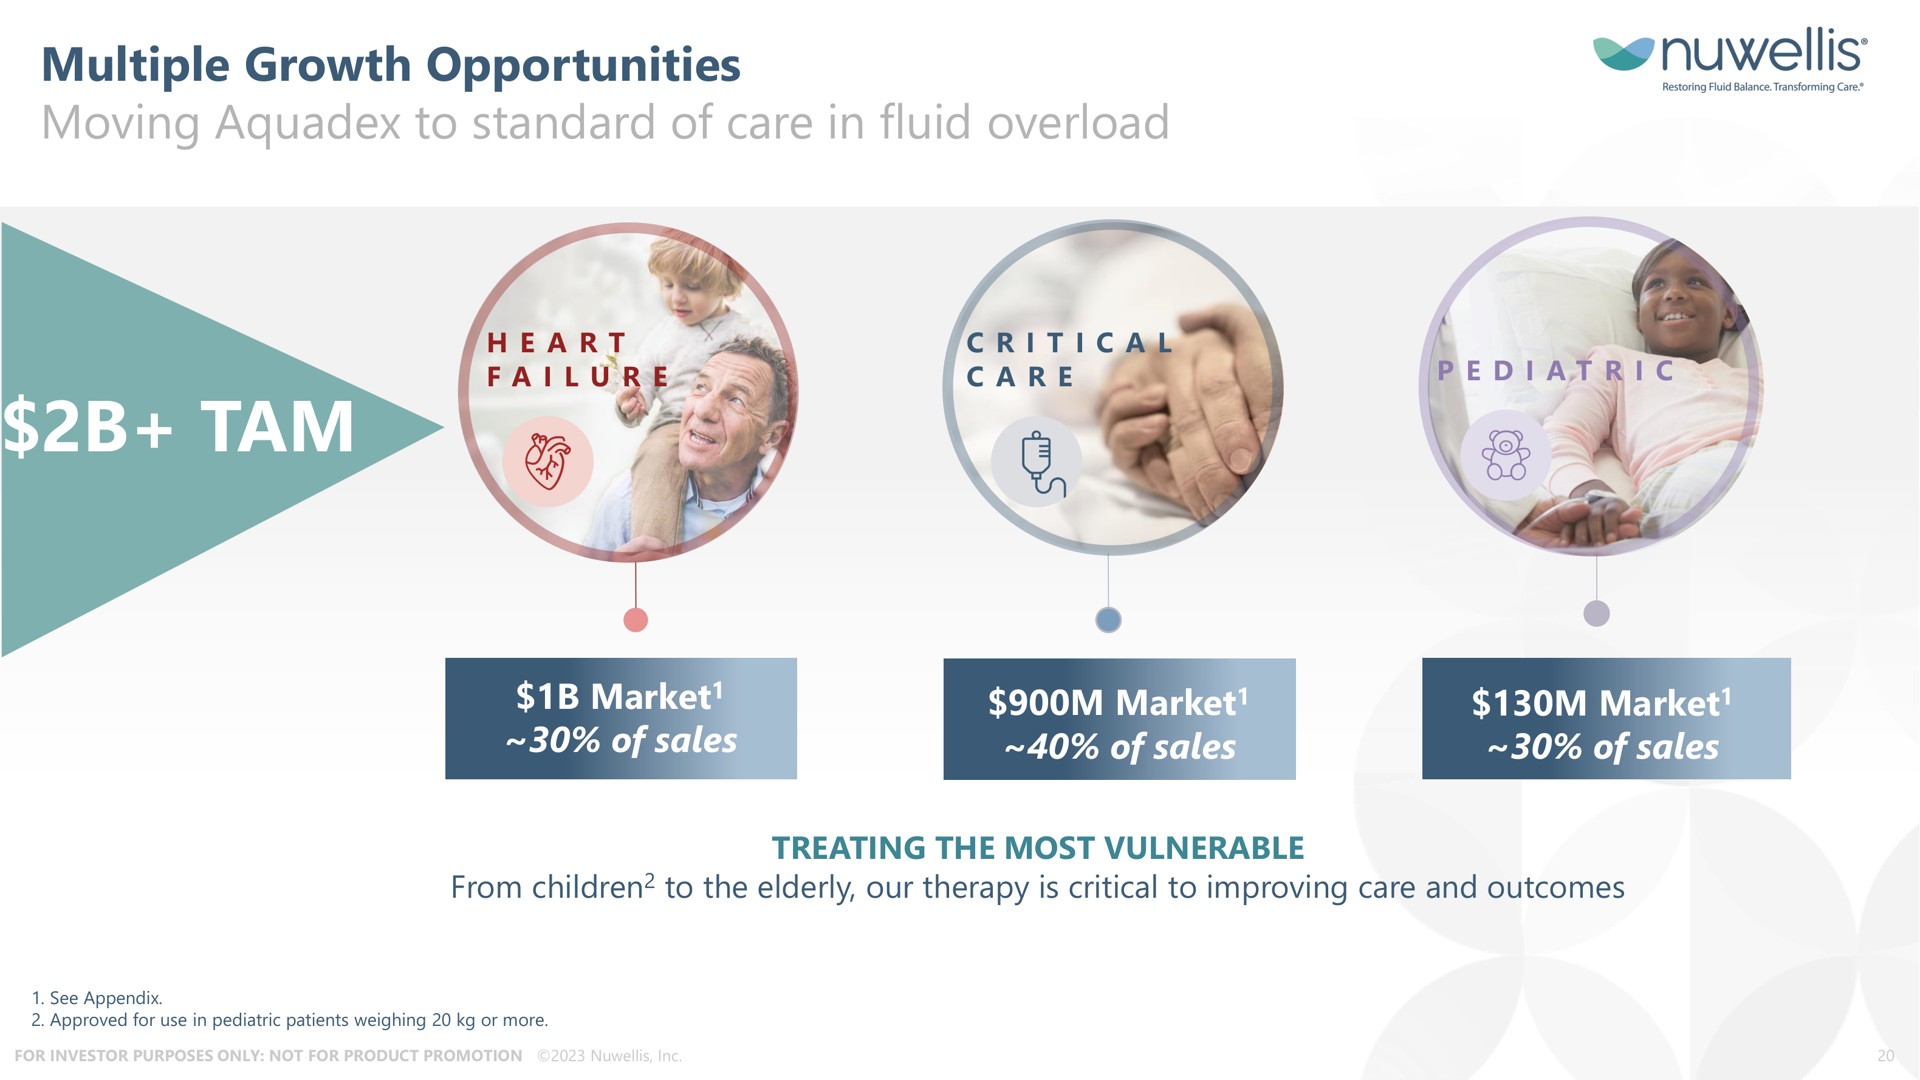 multiple growth opportunities moving to standard of care in fluid overload tam market sales market sales market sales | Nuwellis